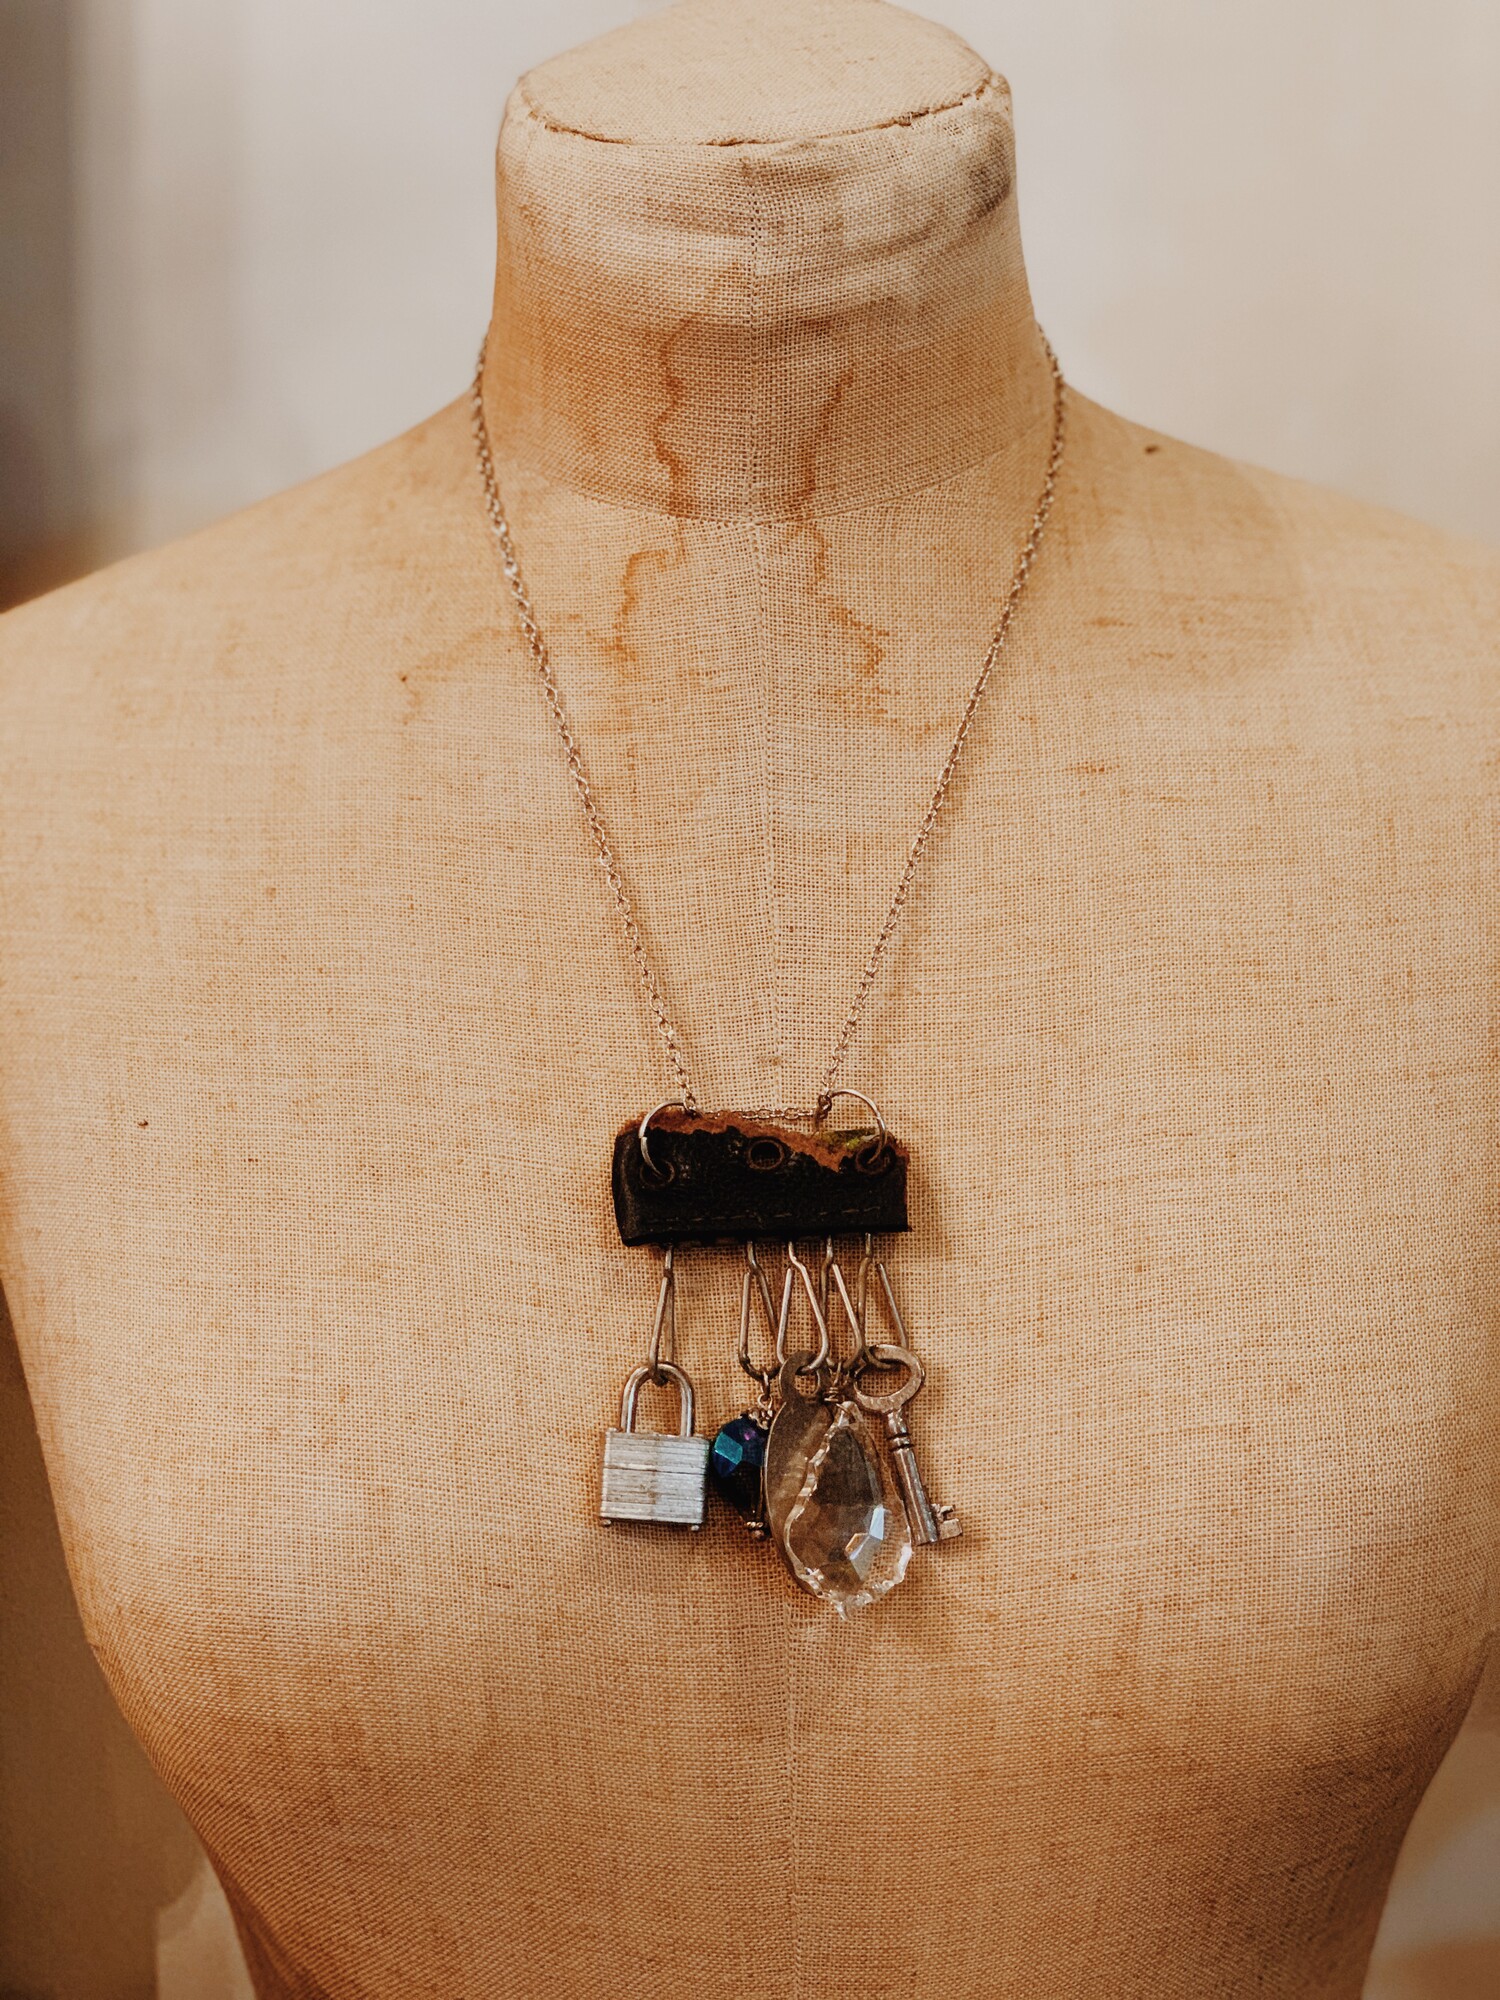 This one of a kind, handmade necklace is perfect for those who love unique! Hanging from leather is a padlock, a key, a crystal, a heart charm, and a silver tag. It is on a 20 inch chain.